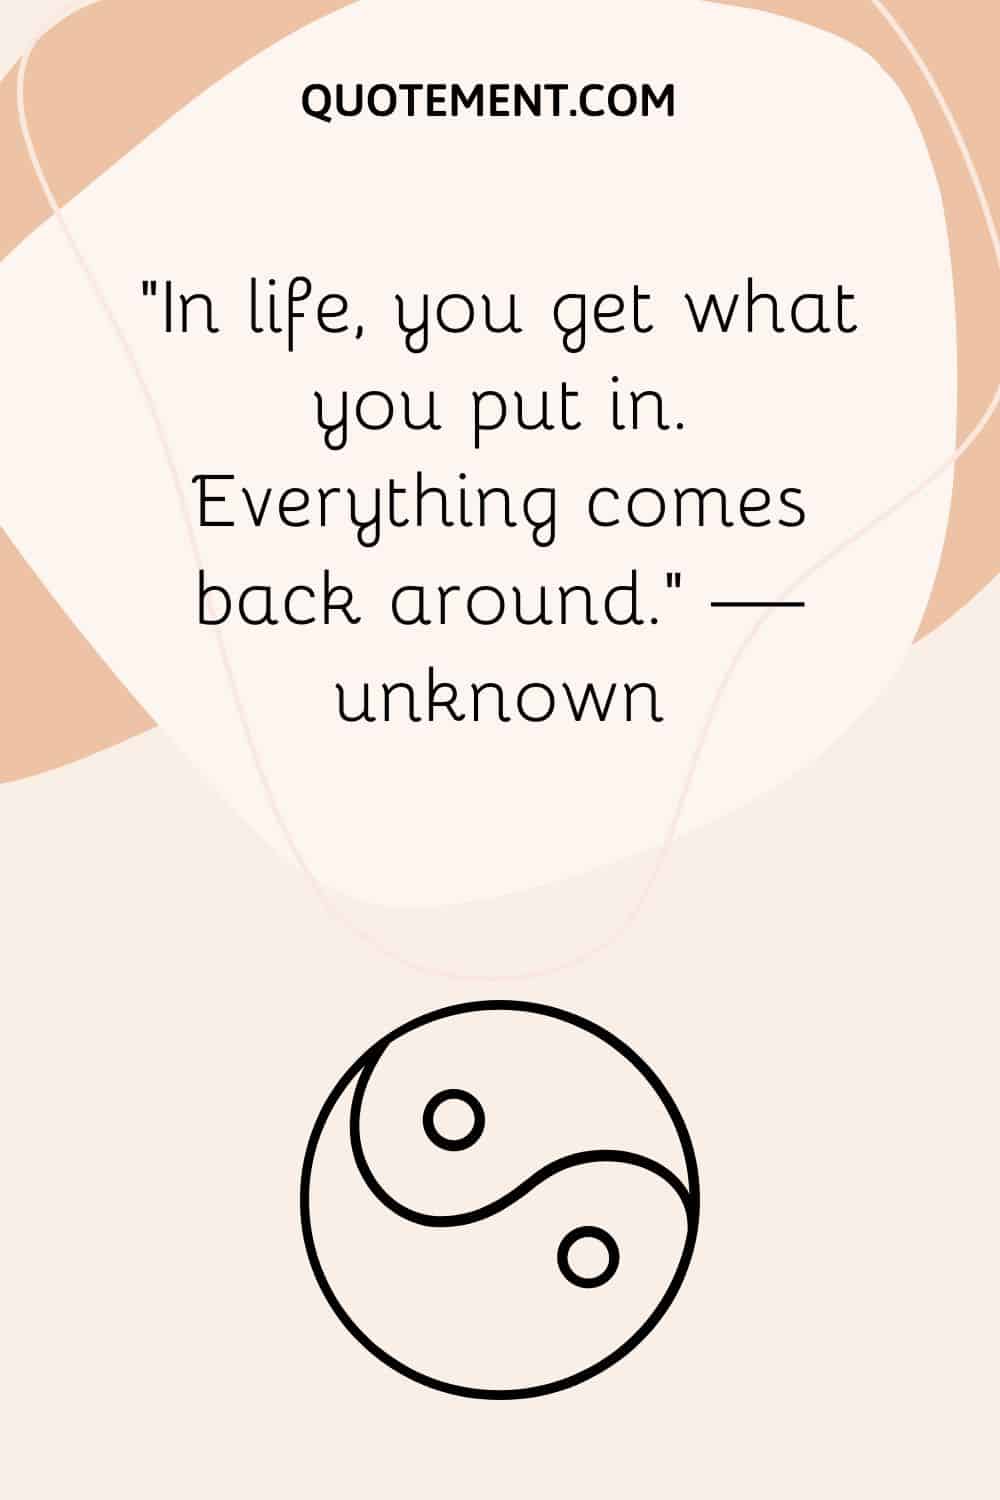 In life, you get what you put in. Everything comes back around.